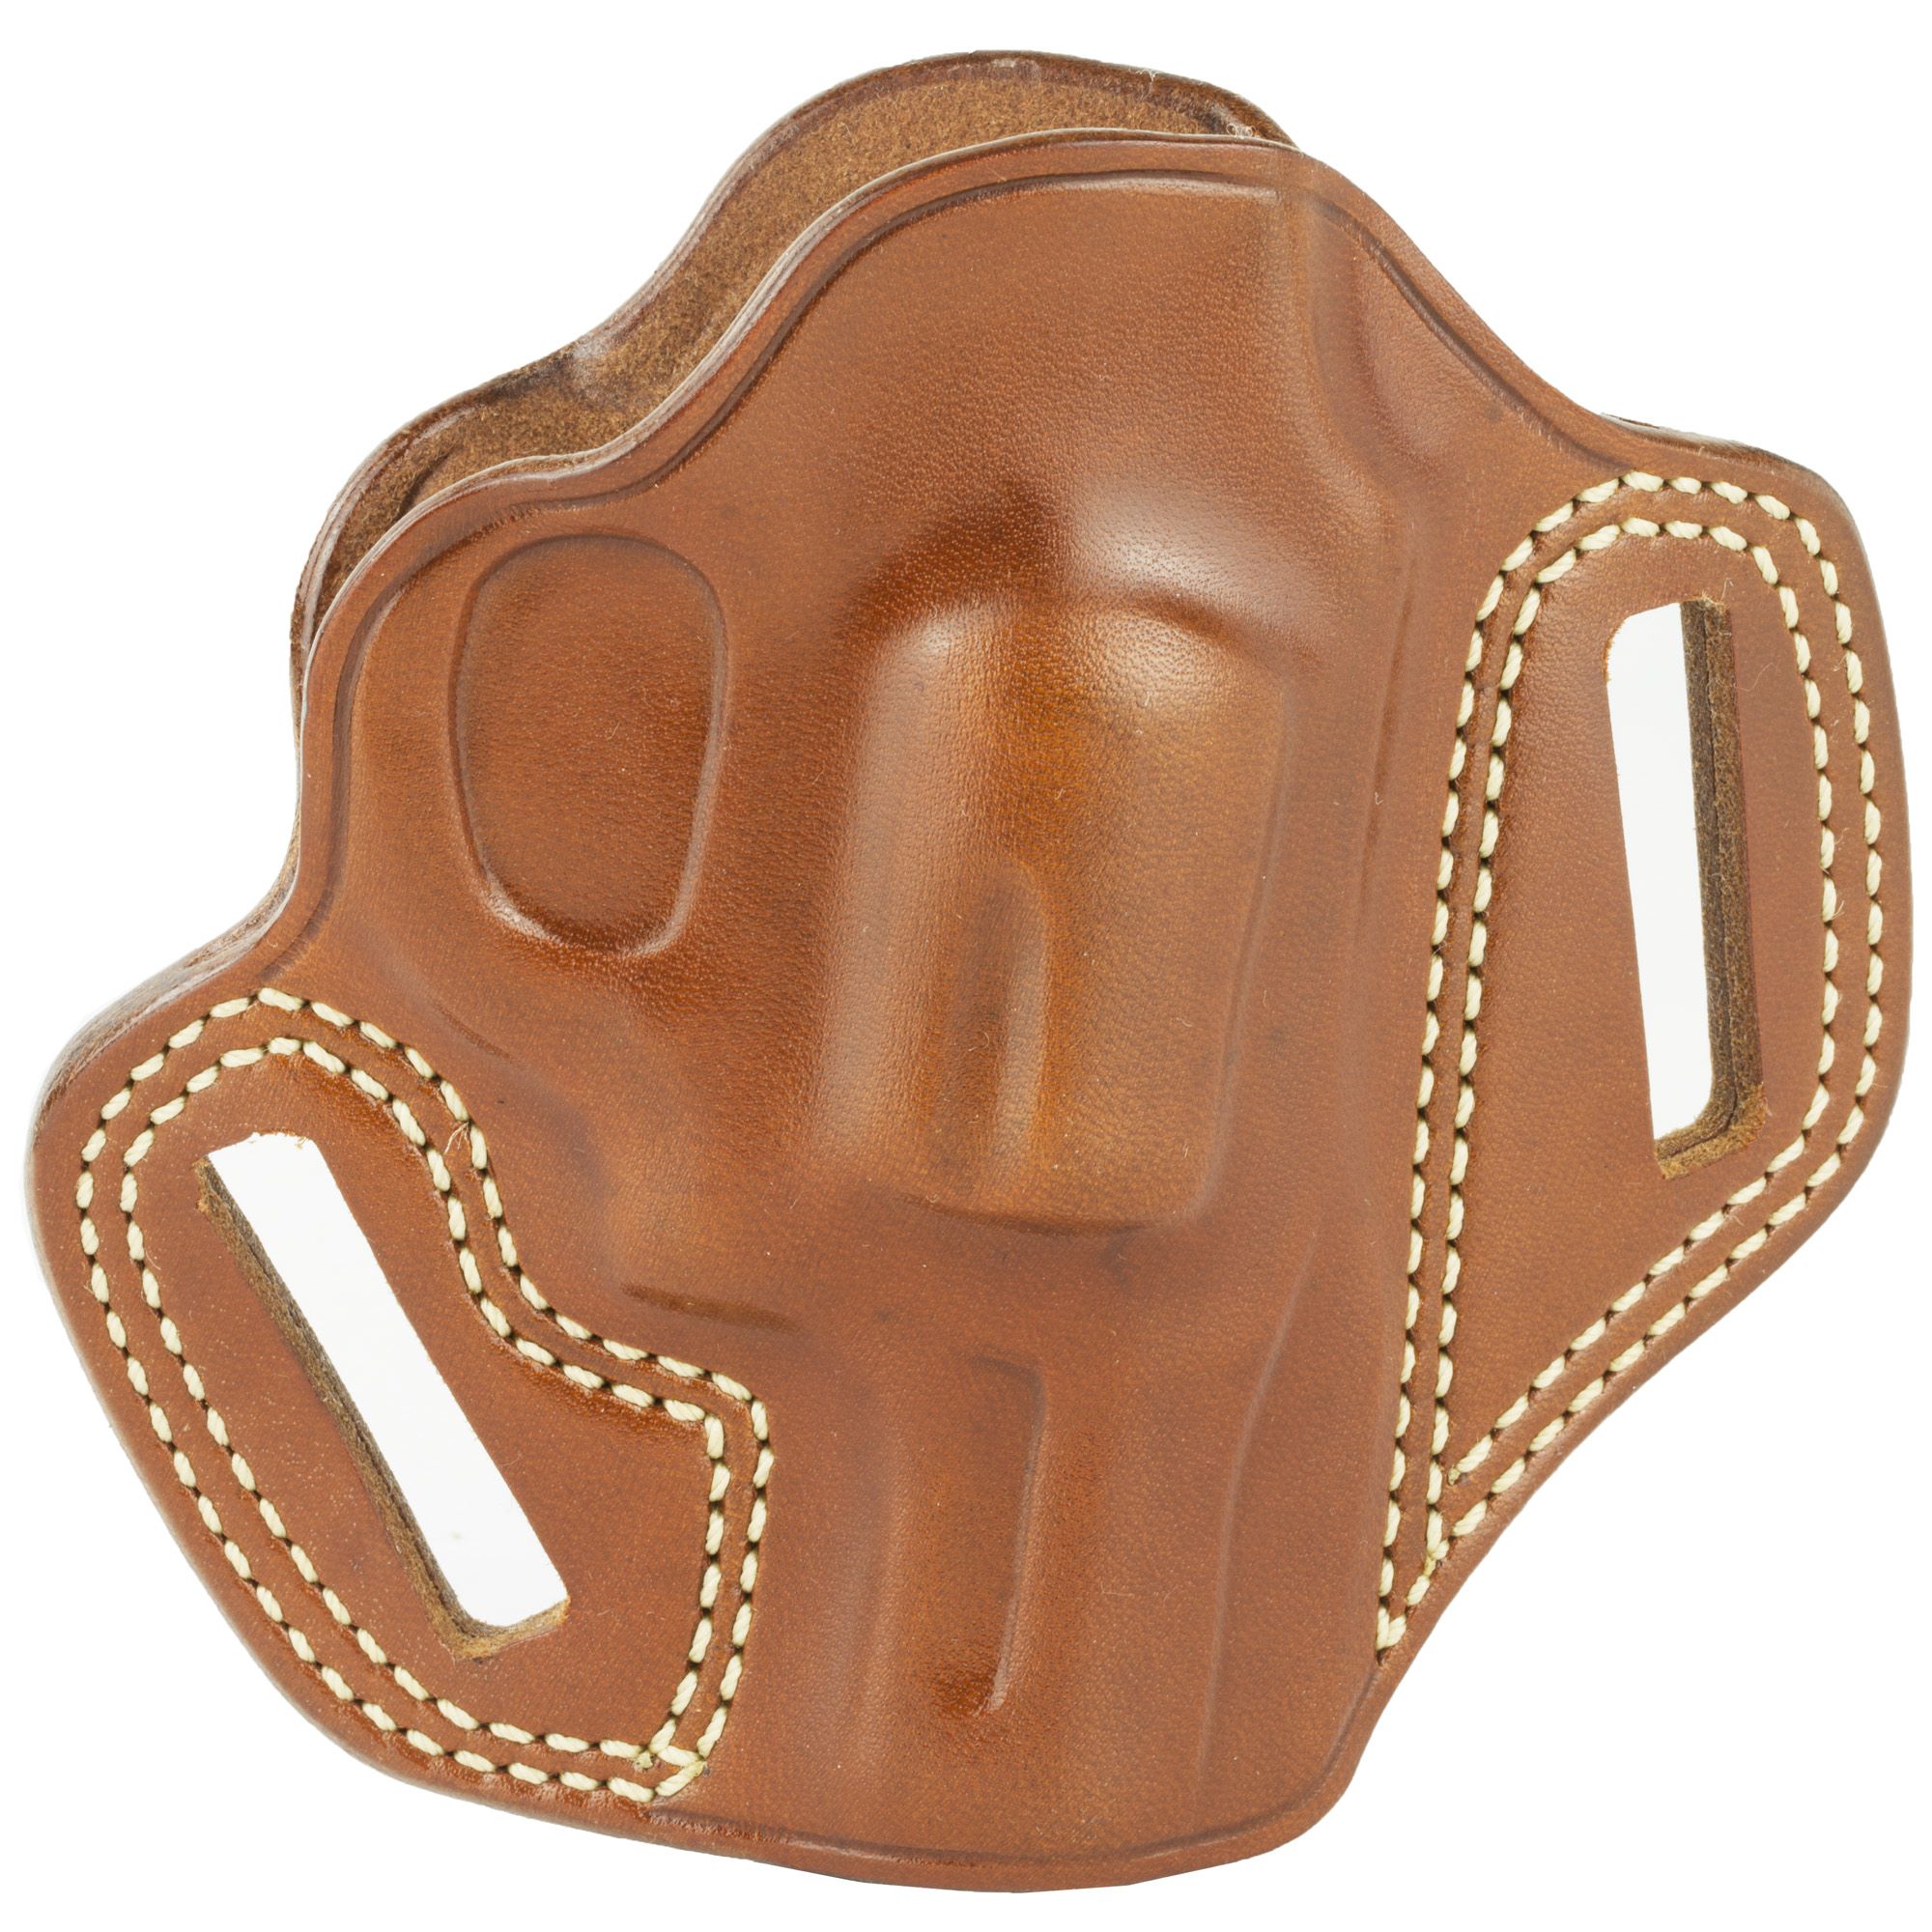 Galco Combat Master Concealment Holster - Right Hand Tan S&W J Fr 2in: CM158